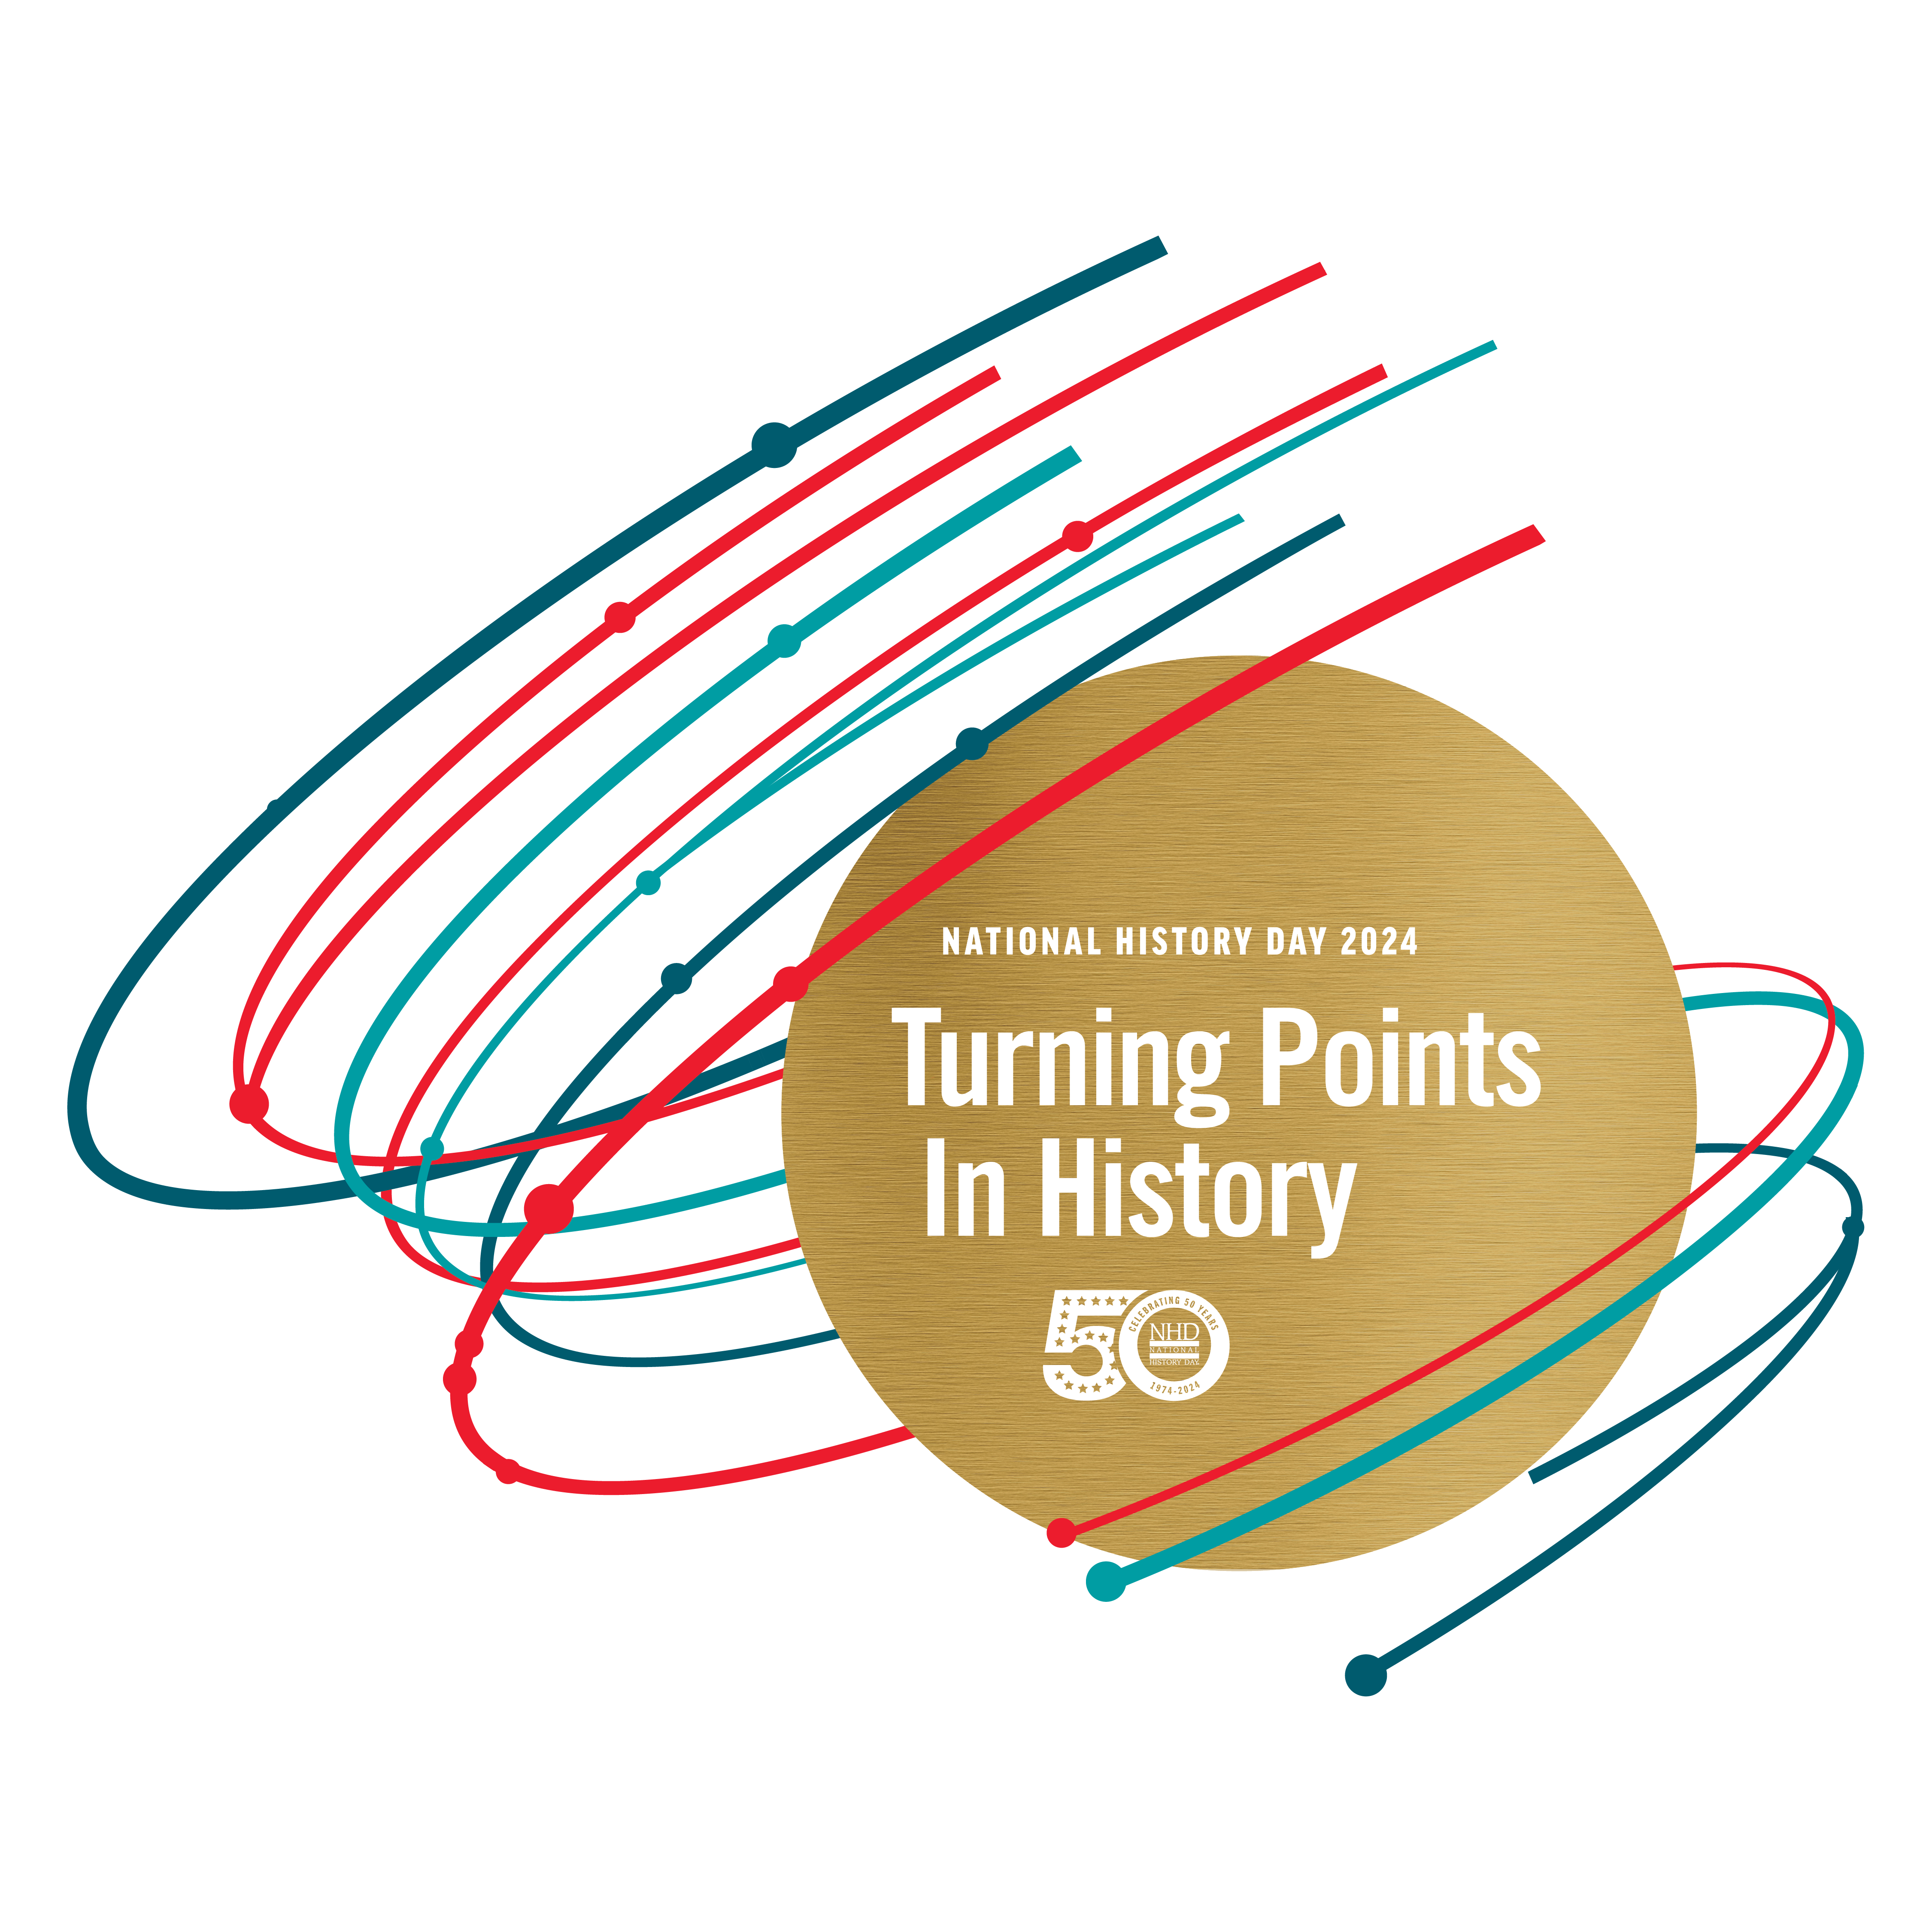 National History Day 2024. Turning Points in History. 50 Year anniversary of NHD.